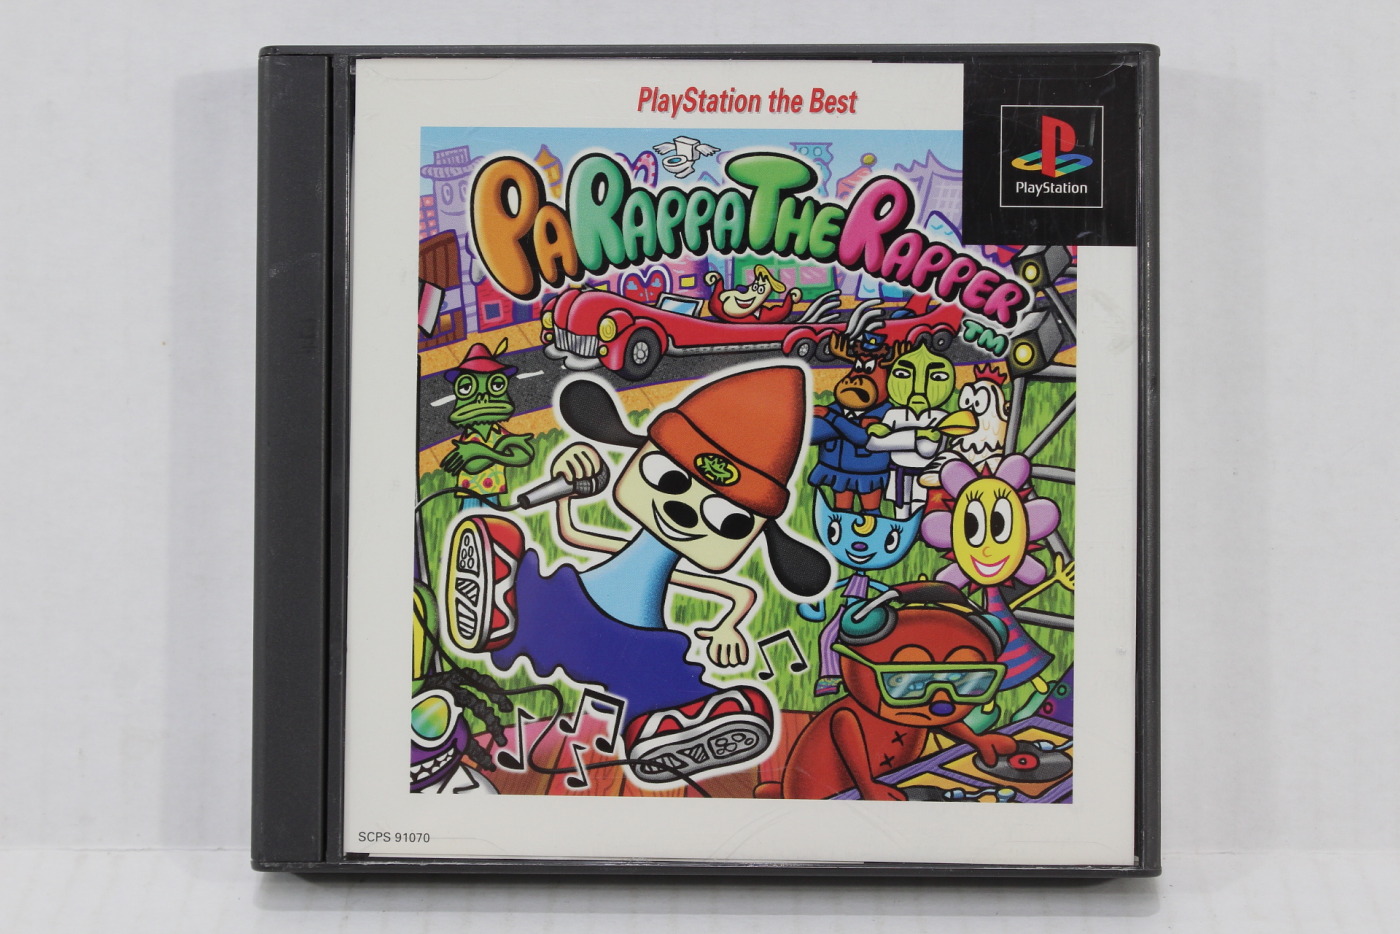 Parappa The Rapper the Best (B) PS1